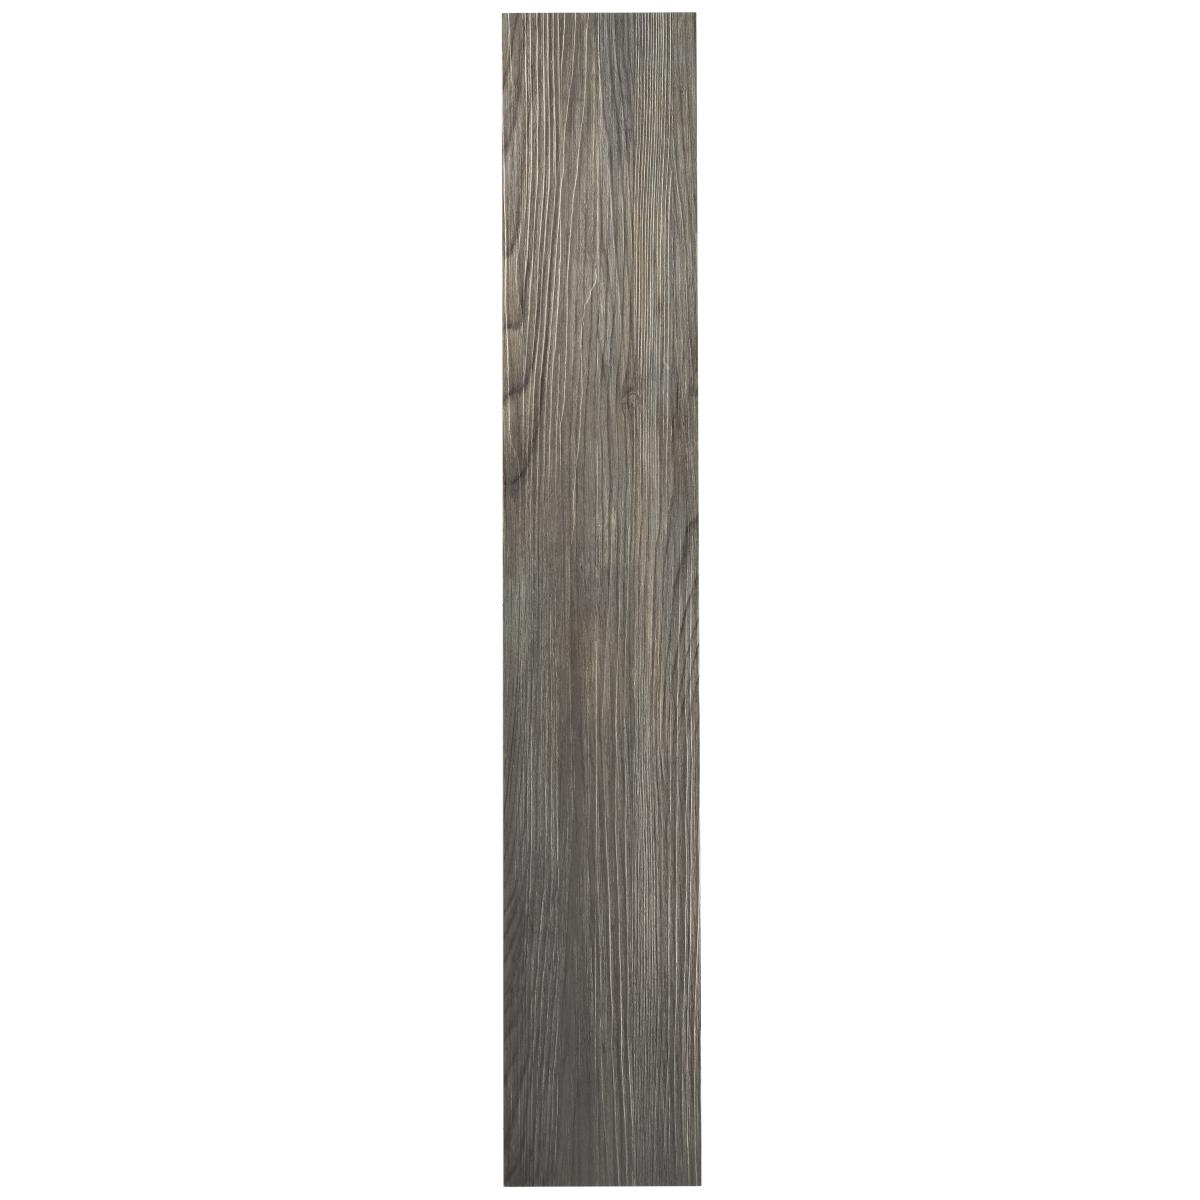 Picture of Achim STP2.0SS10 6 x 36 in. Sterling Silver Spruce 2 mm Self Adhesive Vinyl Floor Planks&#44; 15 sq. ft. - 10 Planks Per Box